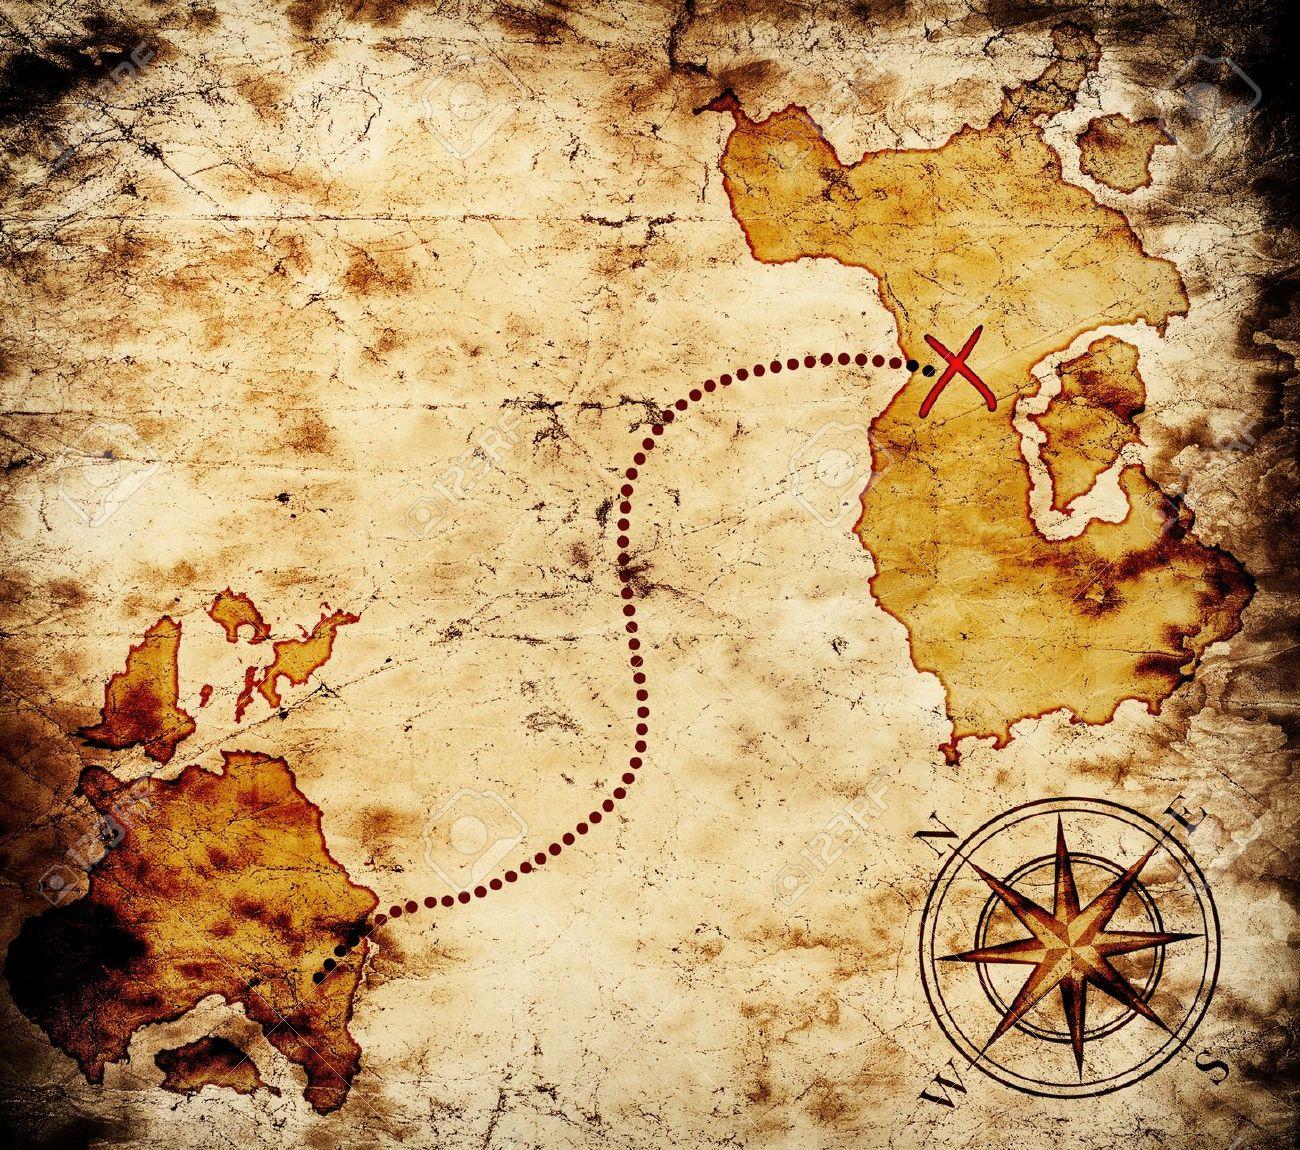 Collection of Treasure Map Wallpaper (image in Collection)